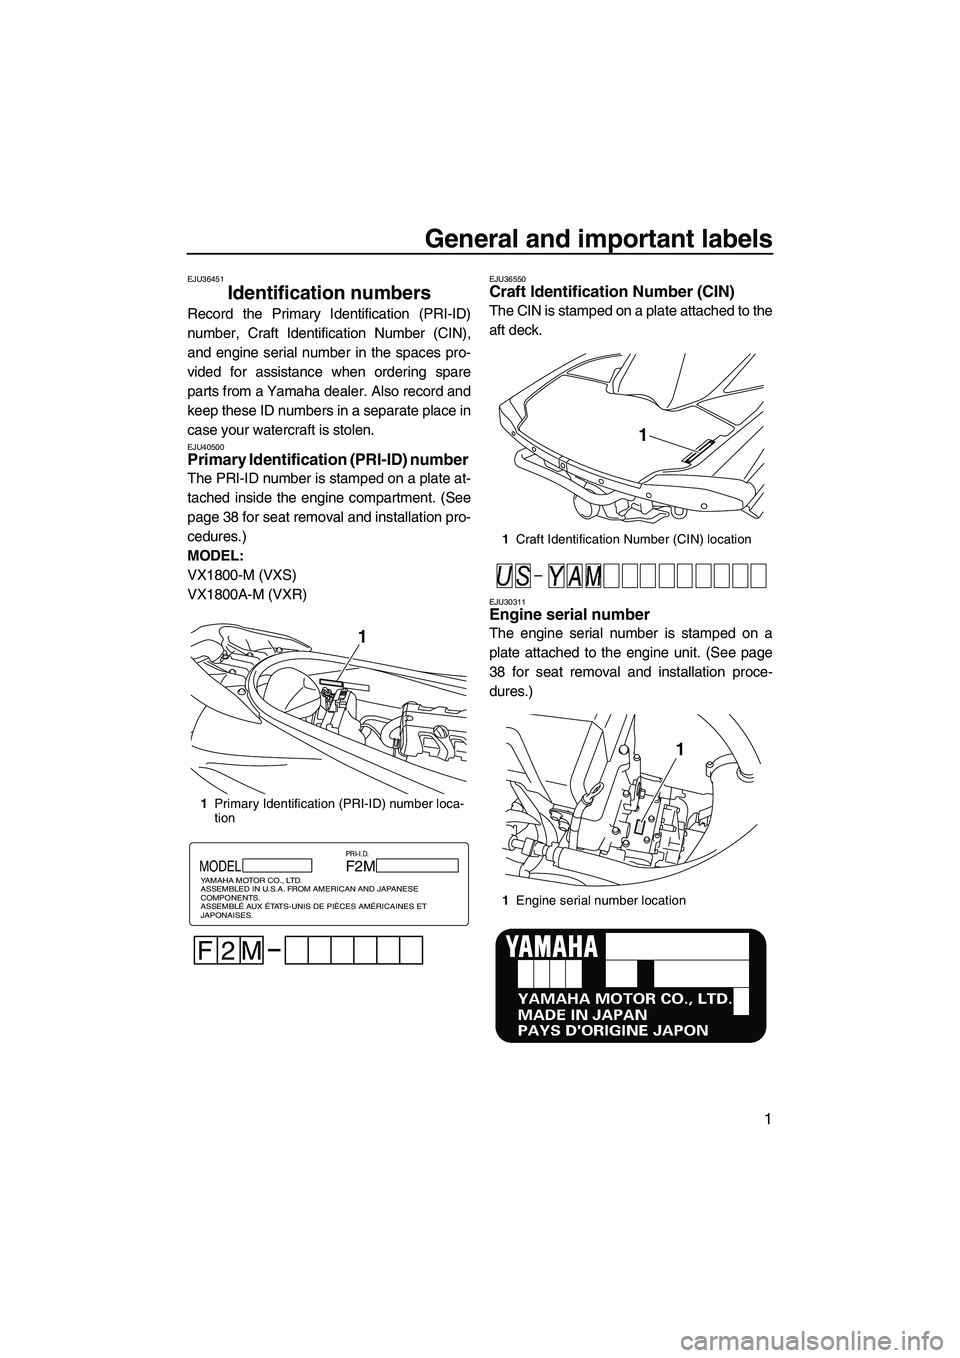 YAMAHA VXR 2013  Owners Manual General and important labels
1
EJU36451
Identification numbers 
Record the Primary Identification (PRI-ID)
number, Craft Identification Number (CIN),
and engine serial number in the spaces pro-
vided 